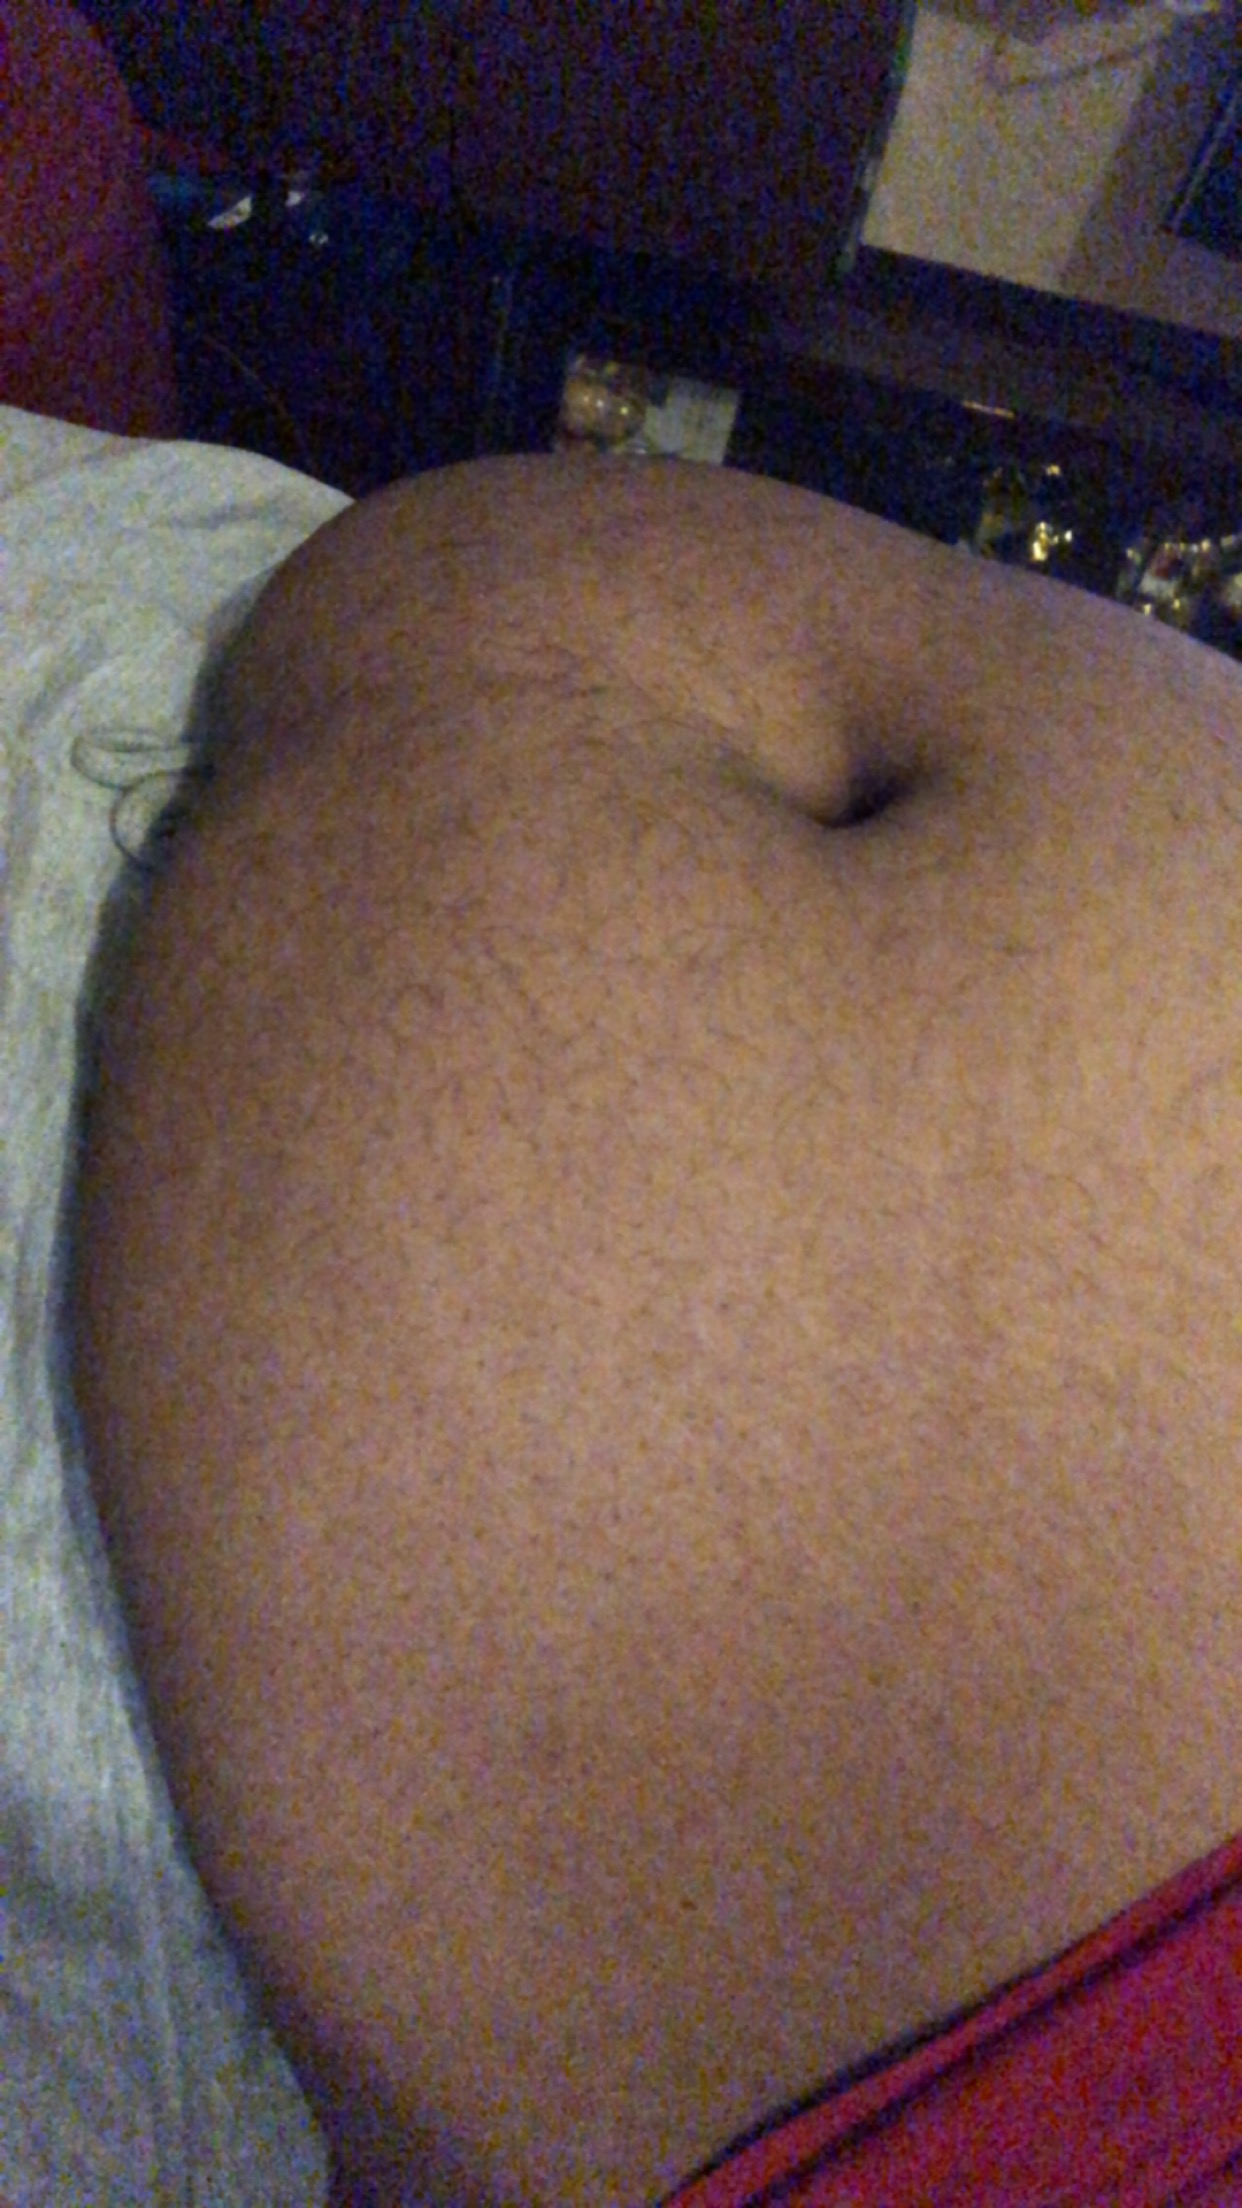 Bbw Belly Fetish - My Fat Belly and deep navel play - ThisVid.com